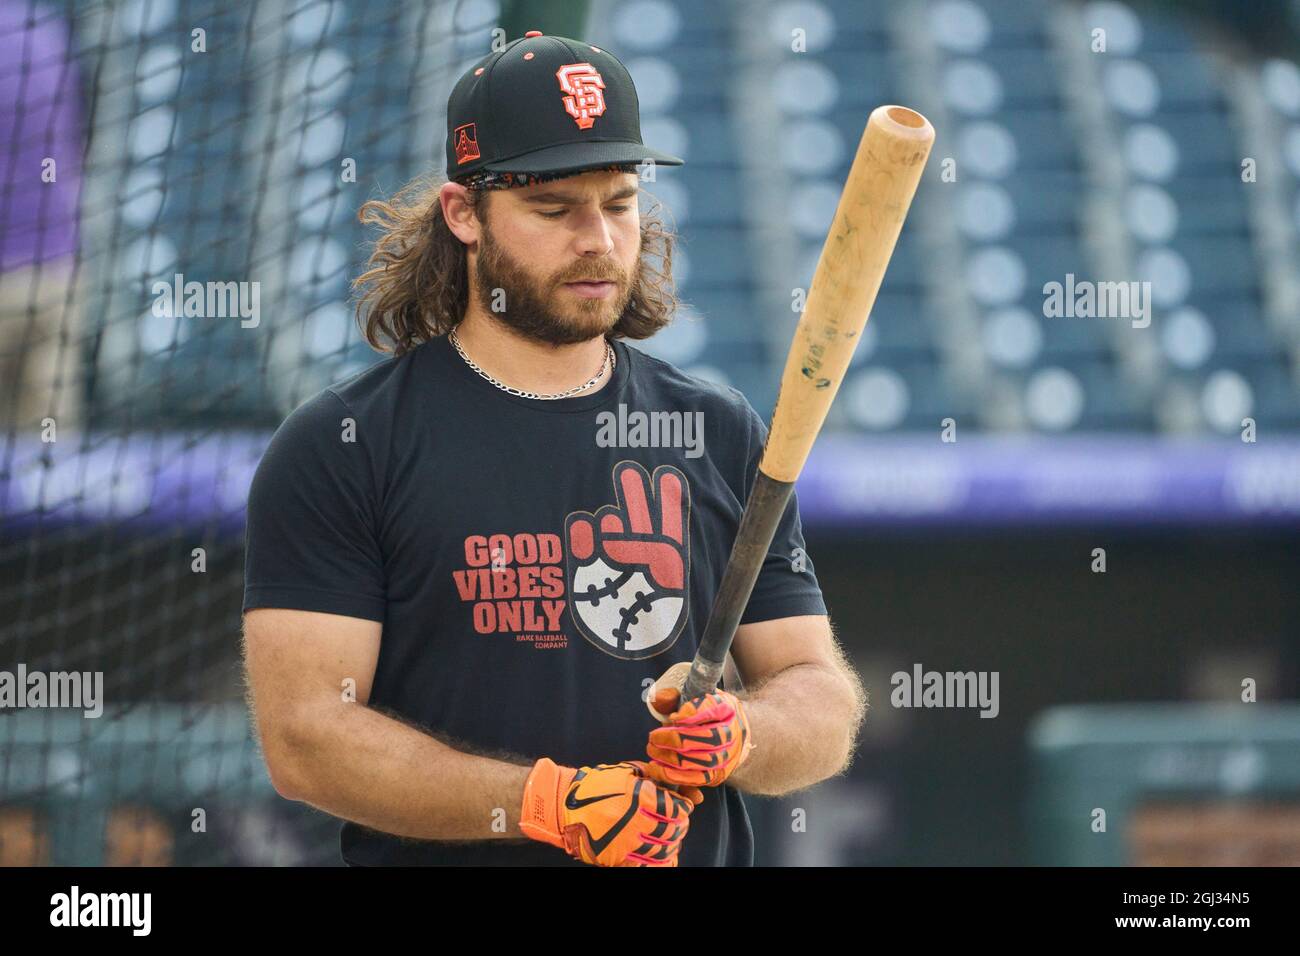 Denver CO, USA. 24th Sep, 2021. San Francisco shortstop Brandon Crawford  (35) during batting practice before the game with San Francisco Giants and  Colorado Rockies held at Coors Field in Denver Co.